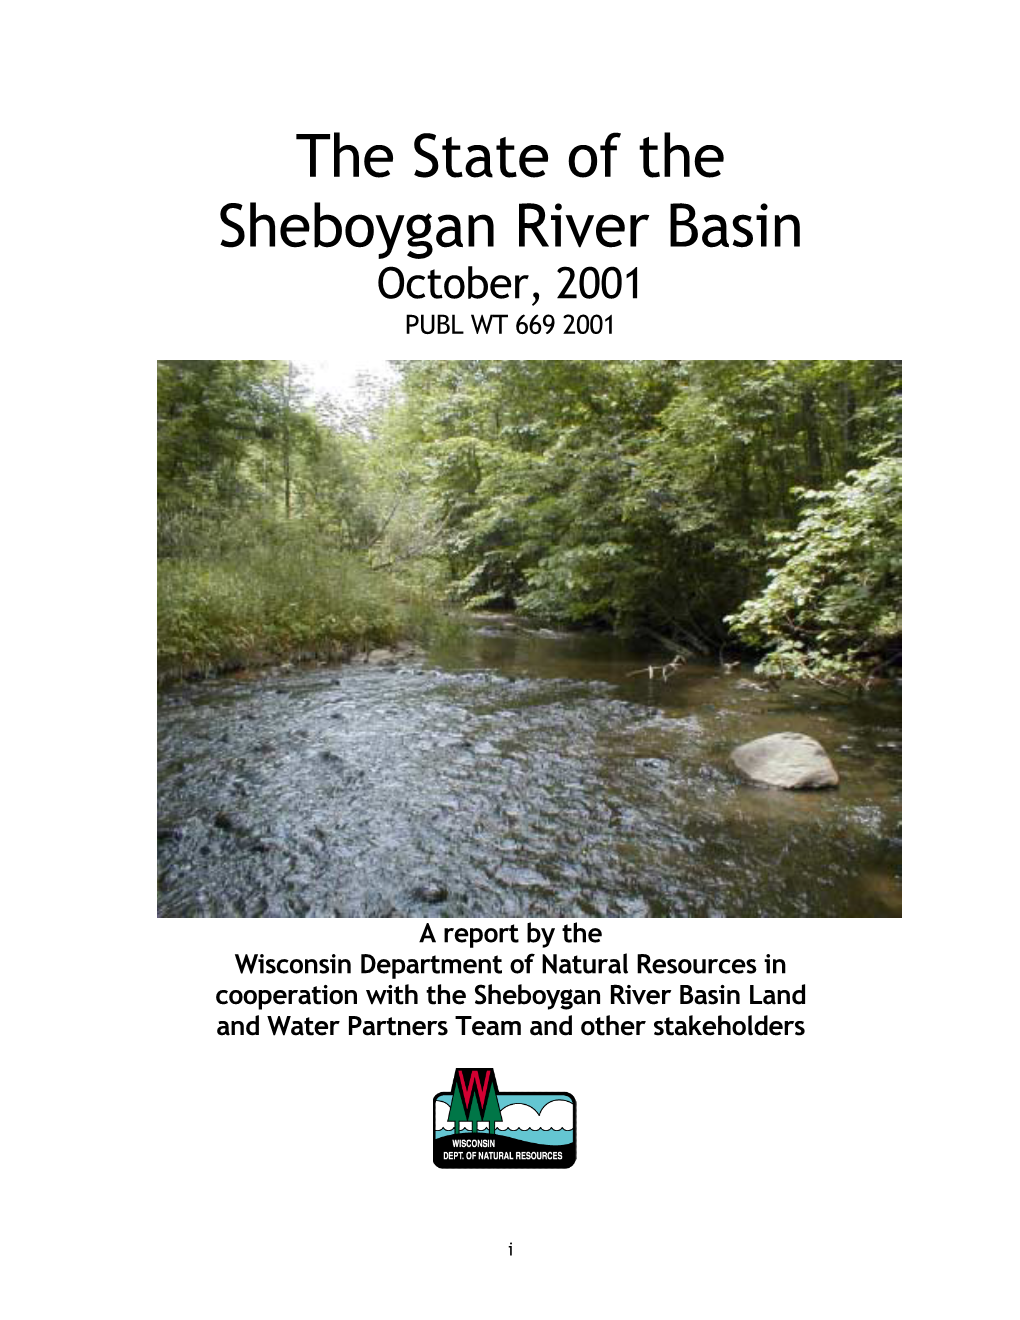 The State of the Sheboygan River Basin October, 2001 PUBL WT 669 2001